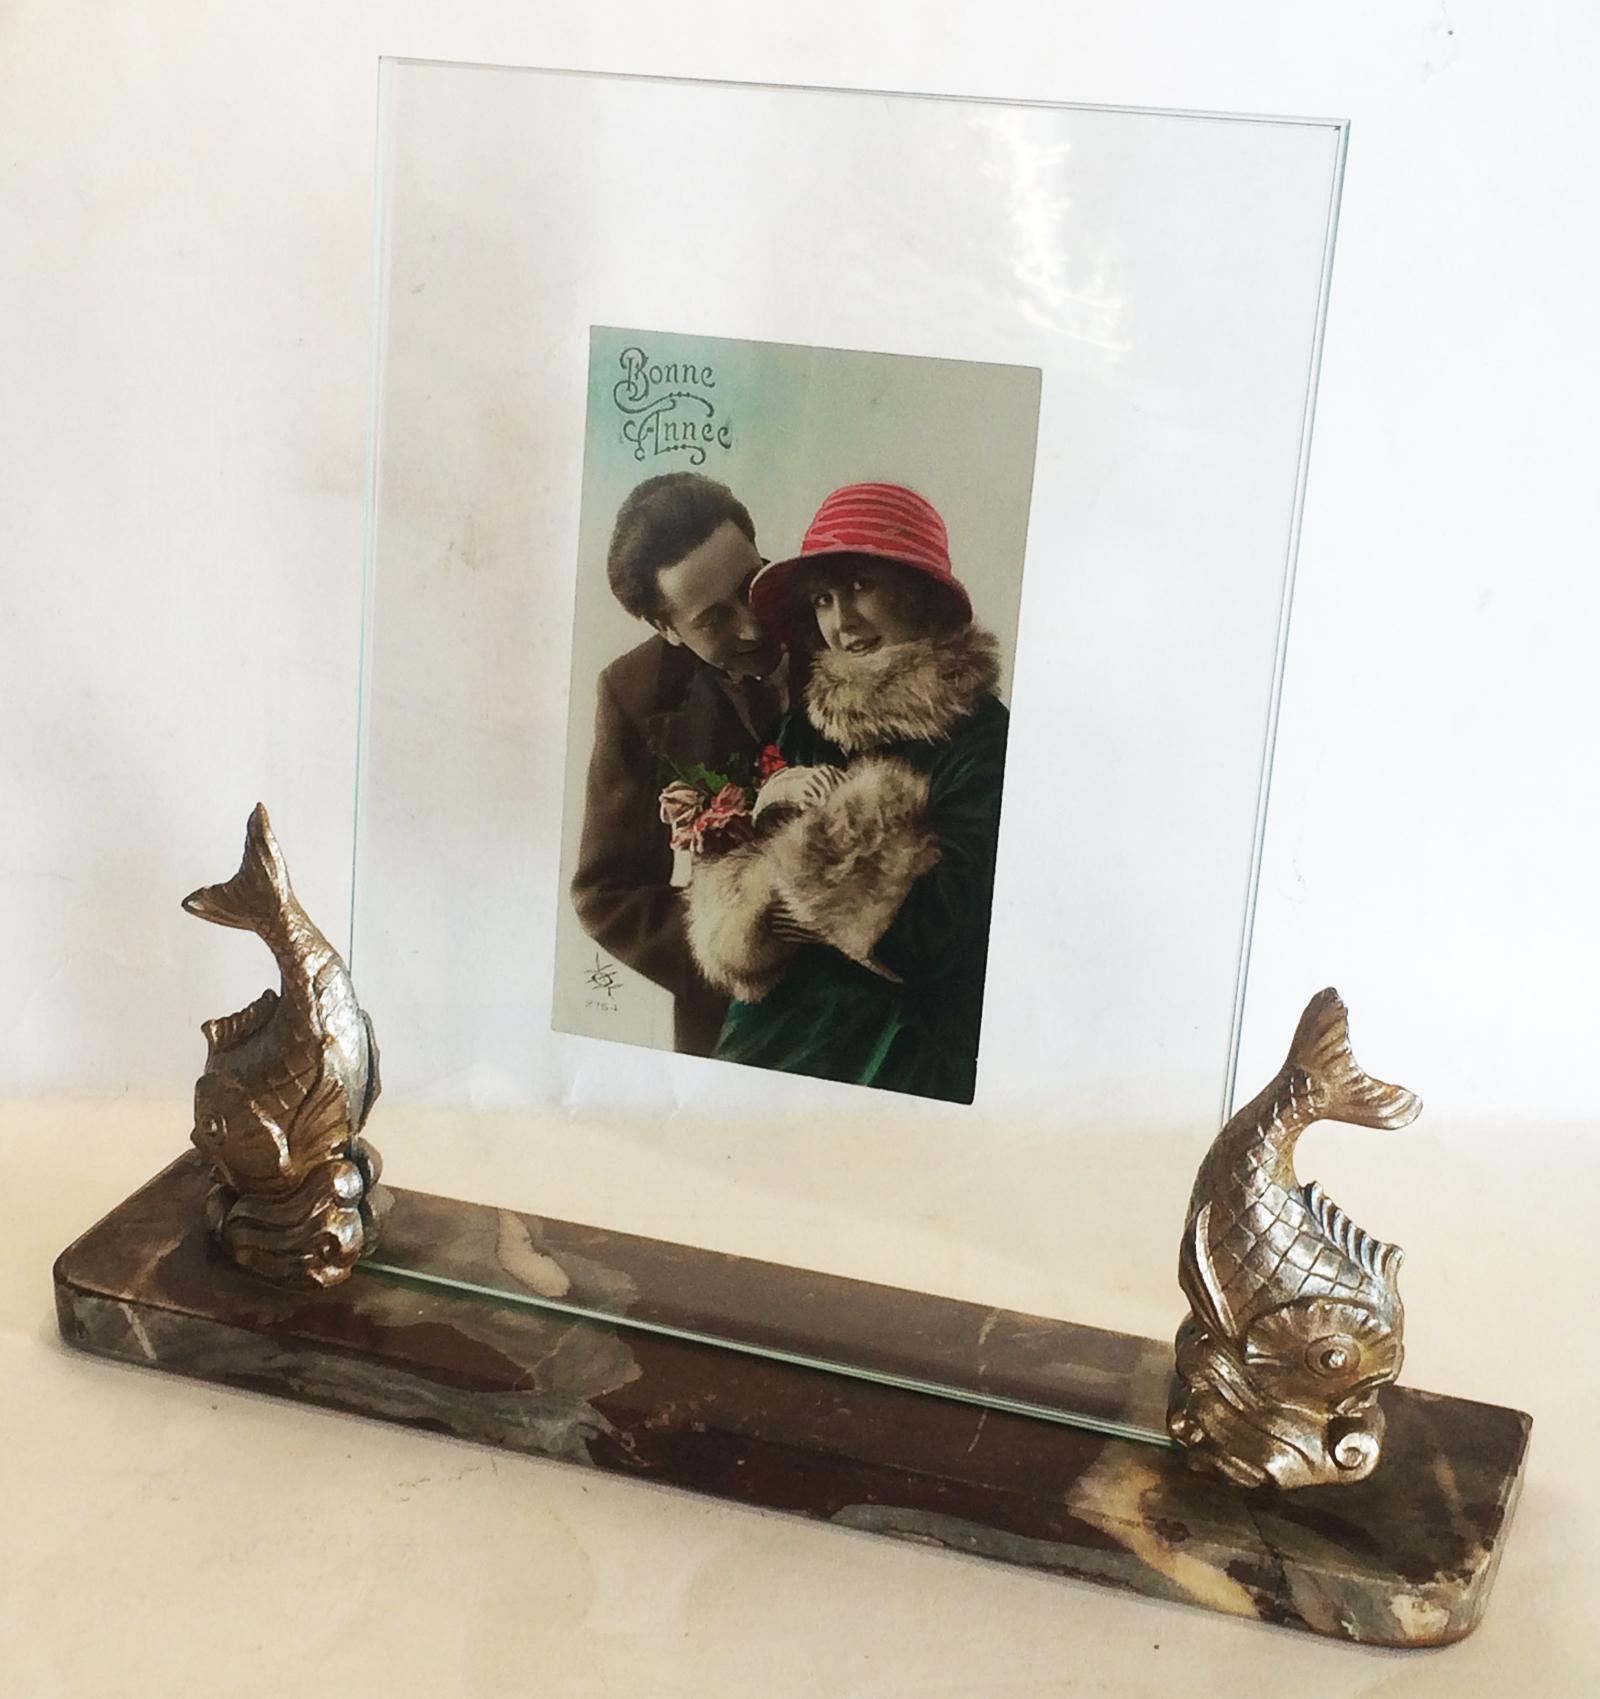 Art Deco, Pisces or double fish, photo frame on polychrome, Belgium marble base, rounded front corners. The marble is mainly plum color, with white, beige, clear and grey veins. The pair of fish supporting the 2 layers of glass that holds the photo,